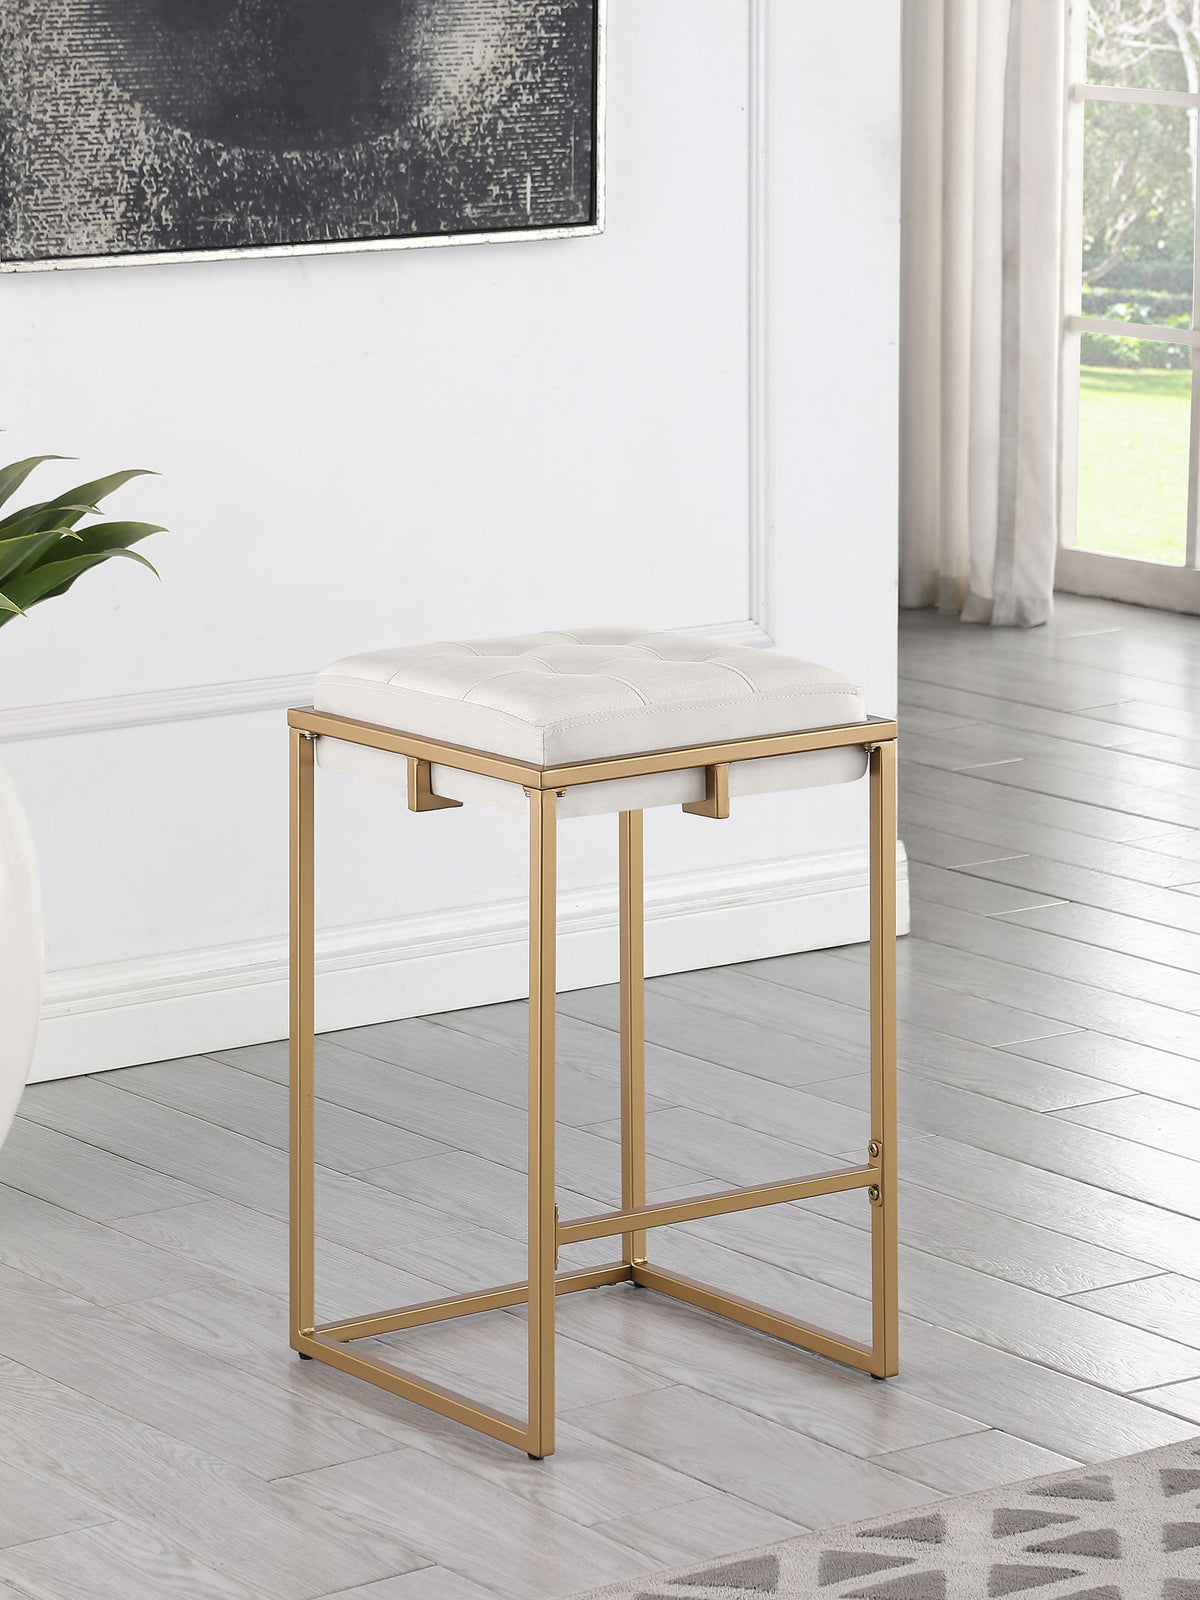 Nadia Square Padded Seat Counter Height Stool (Set of 2) Beige and Gold Nadia Square Padded Seat Counter Height Stool (Set of 2) Beige and Gold Half Price Furniture